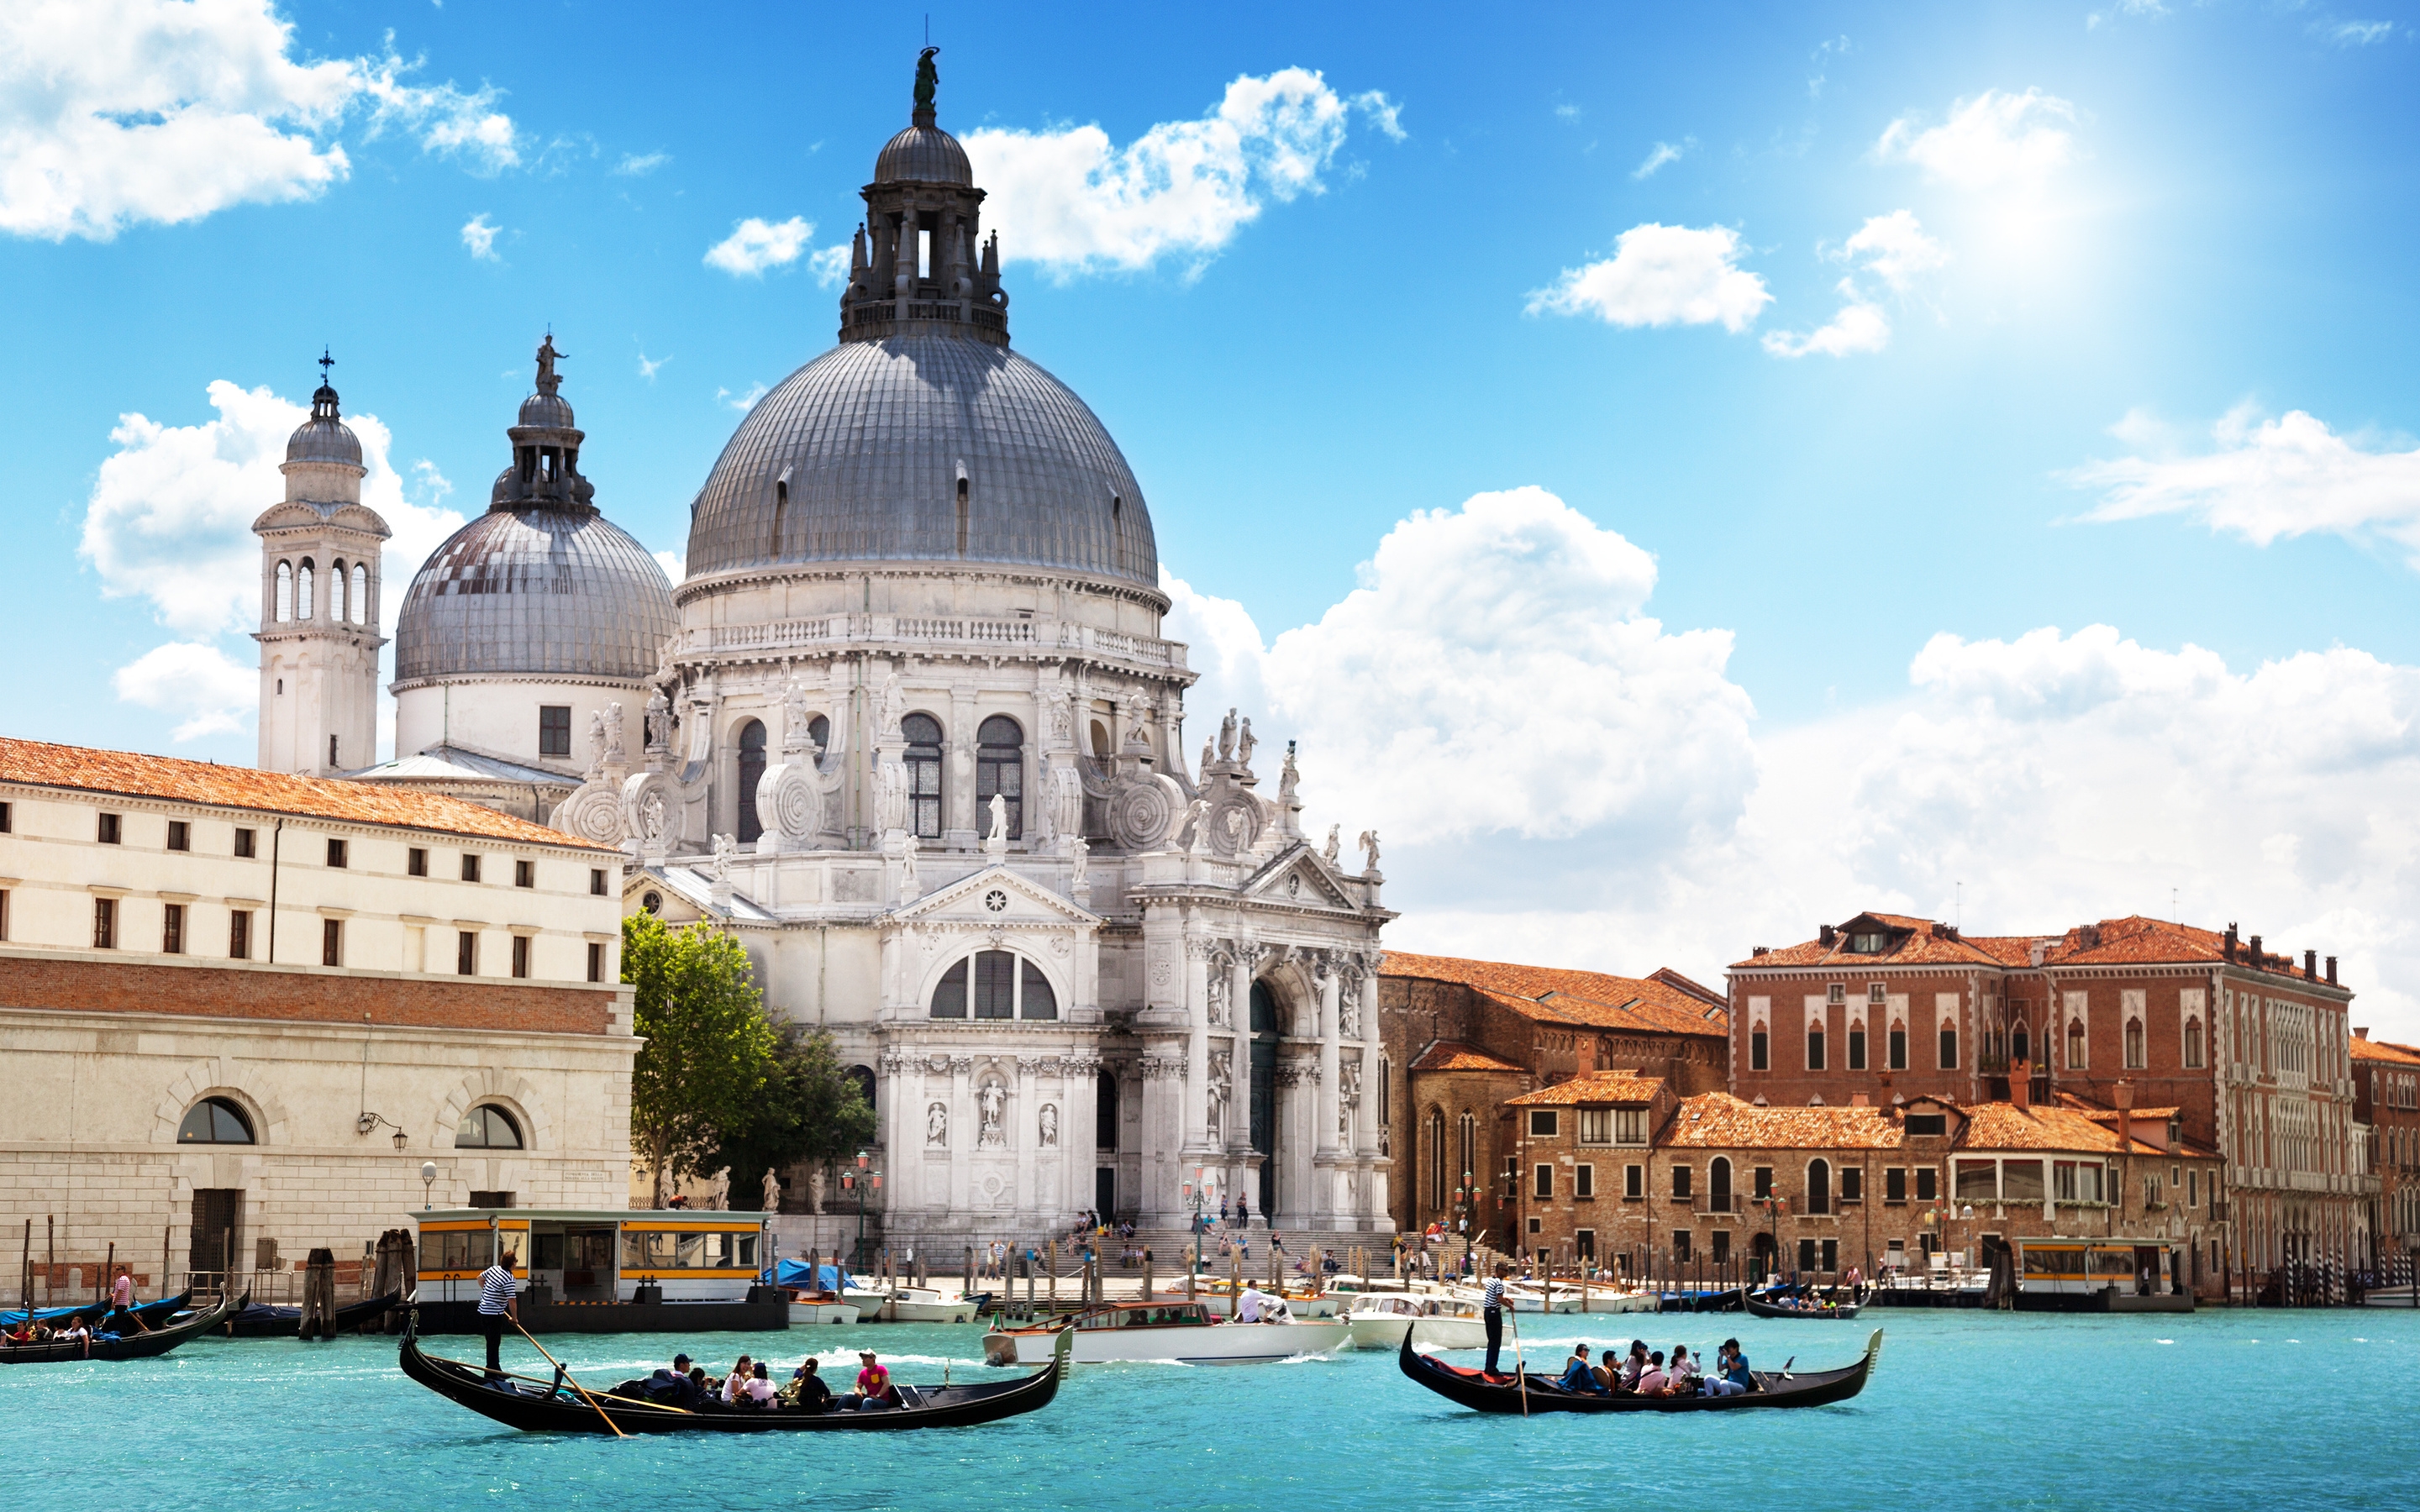 Amazing View from Venice for 2880 x 1800 Retina Display resolution